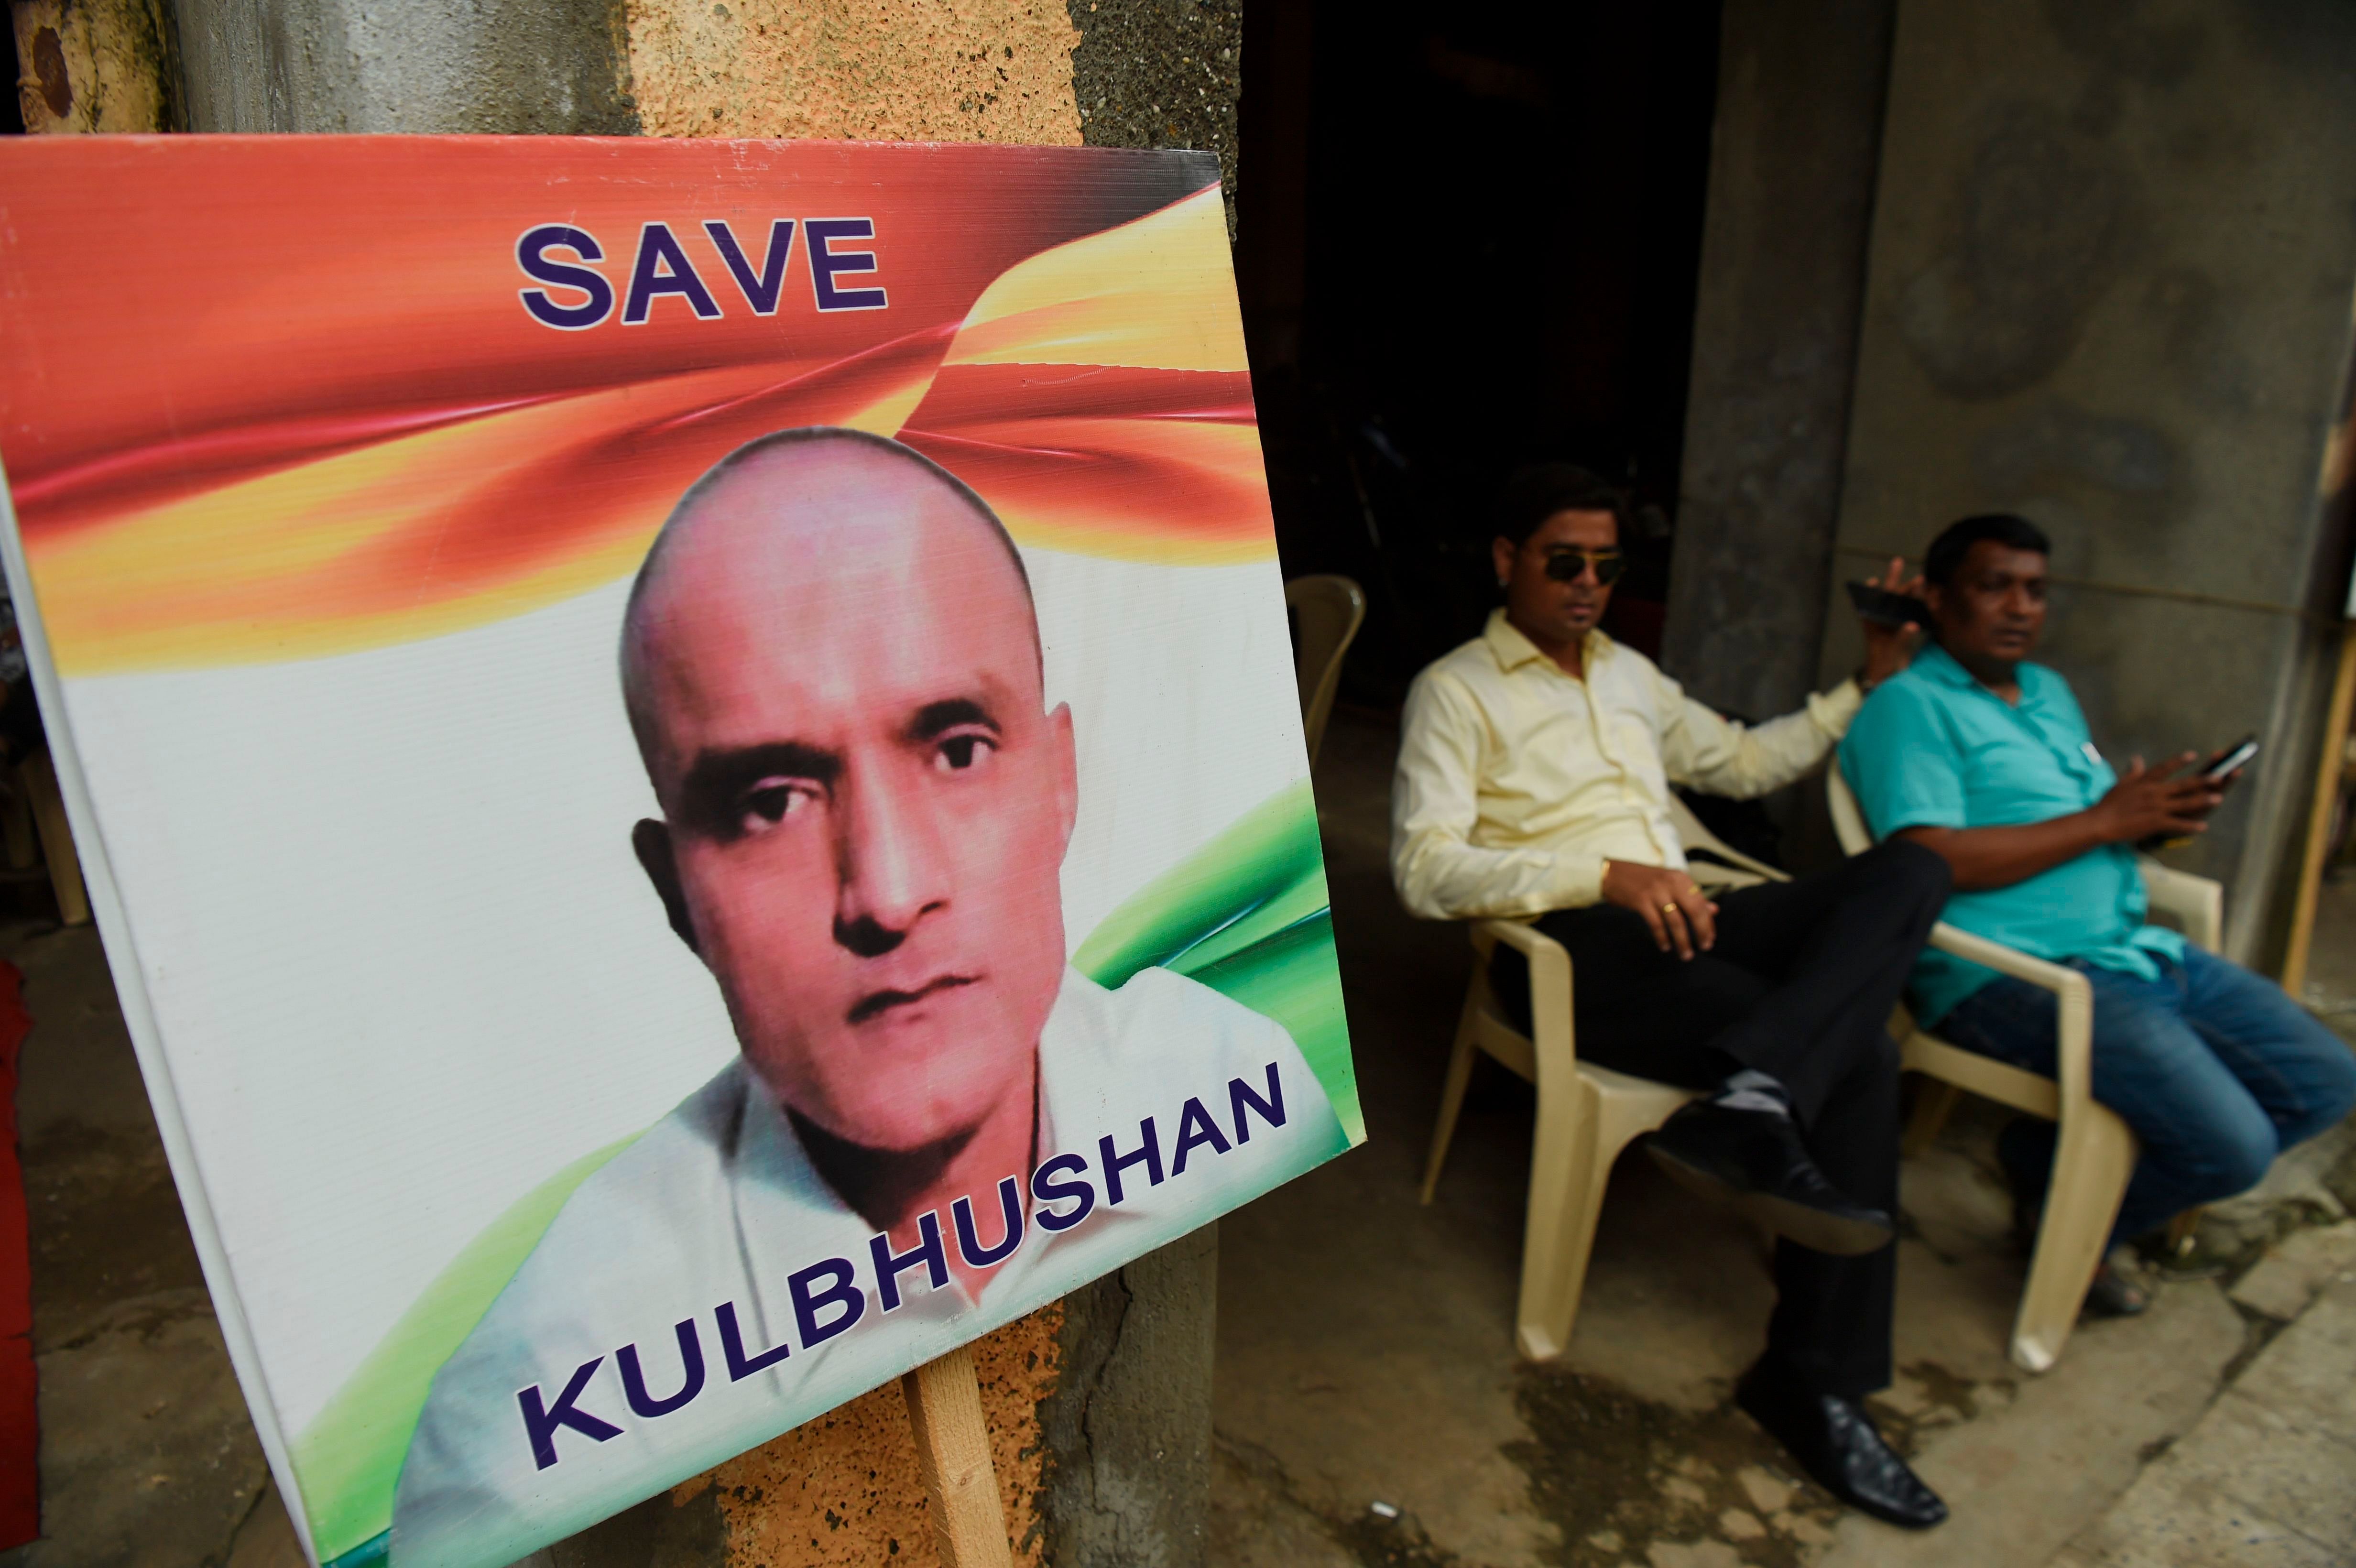 India has asked Pakistan to give unconditional access to Kulbhushan Jadhav, according to ANI.